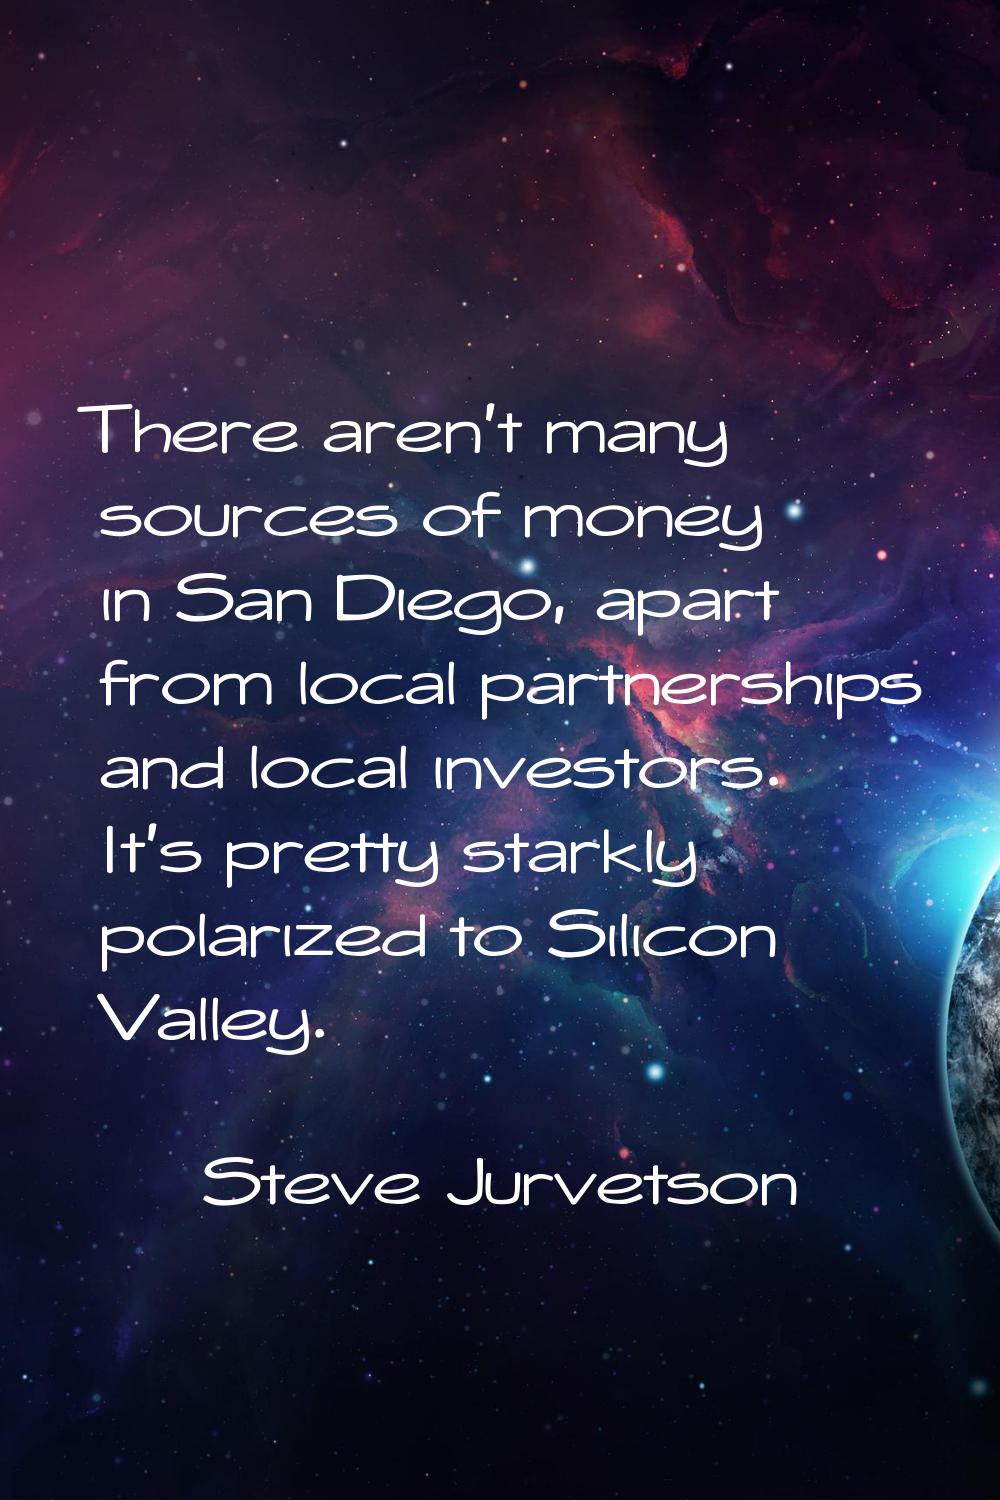 There aren't many sources of money in San Diego, apart from local partnerships and local investors.